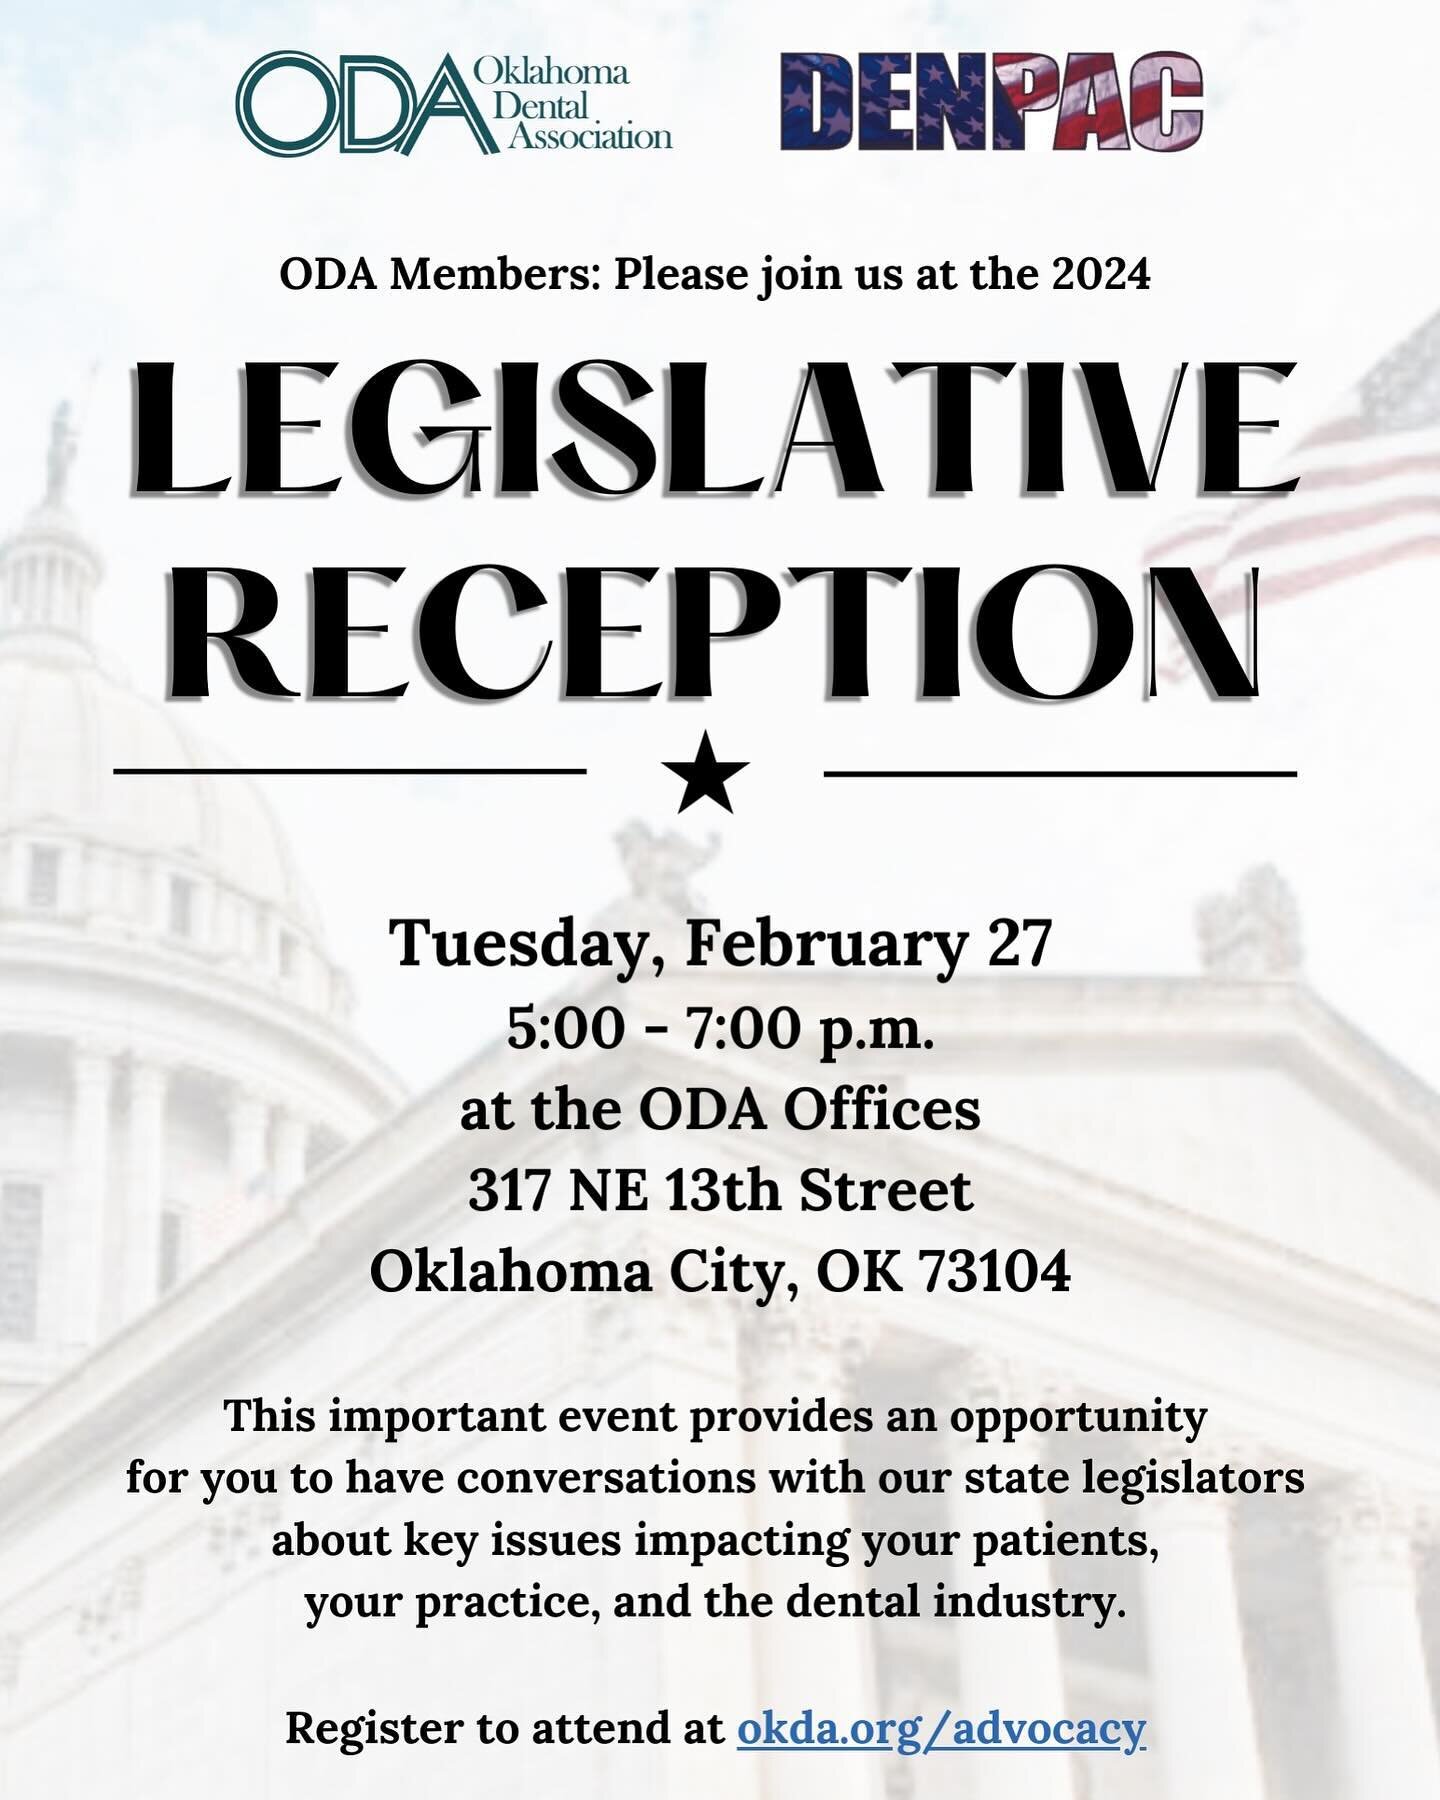 Register to attend the legislative reception with the ODA Tuesday, February 27th! We will get to hear from state legislators and discuss important topics that impact the dental industry. 
RSVP link: https://www.okda.org/advocacy/#:~:text=You&rsquo;re